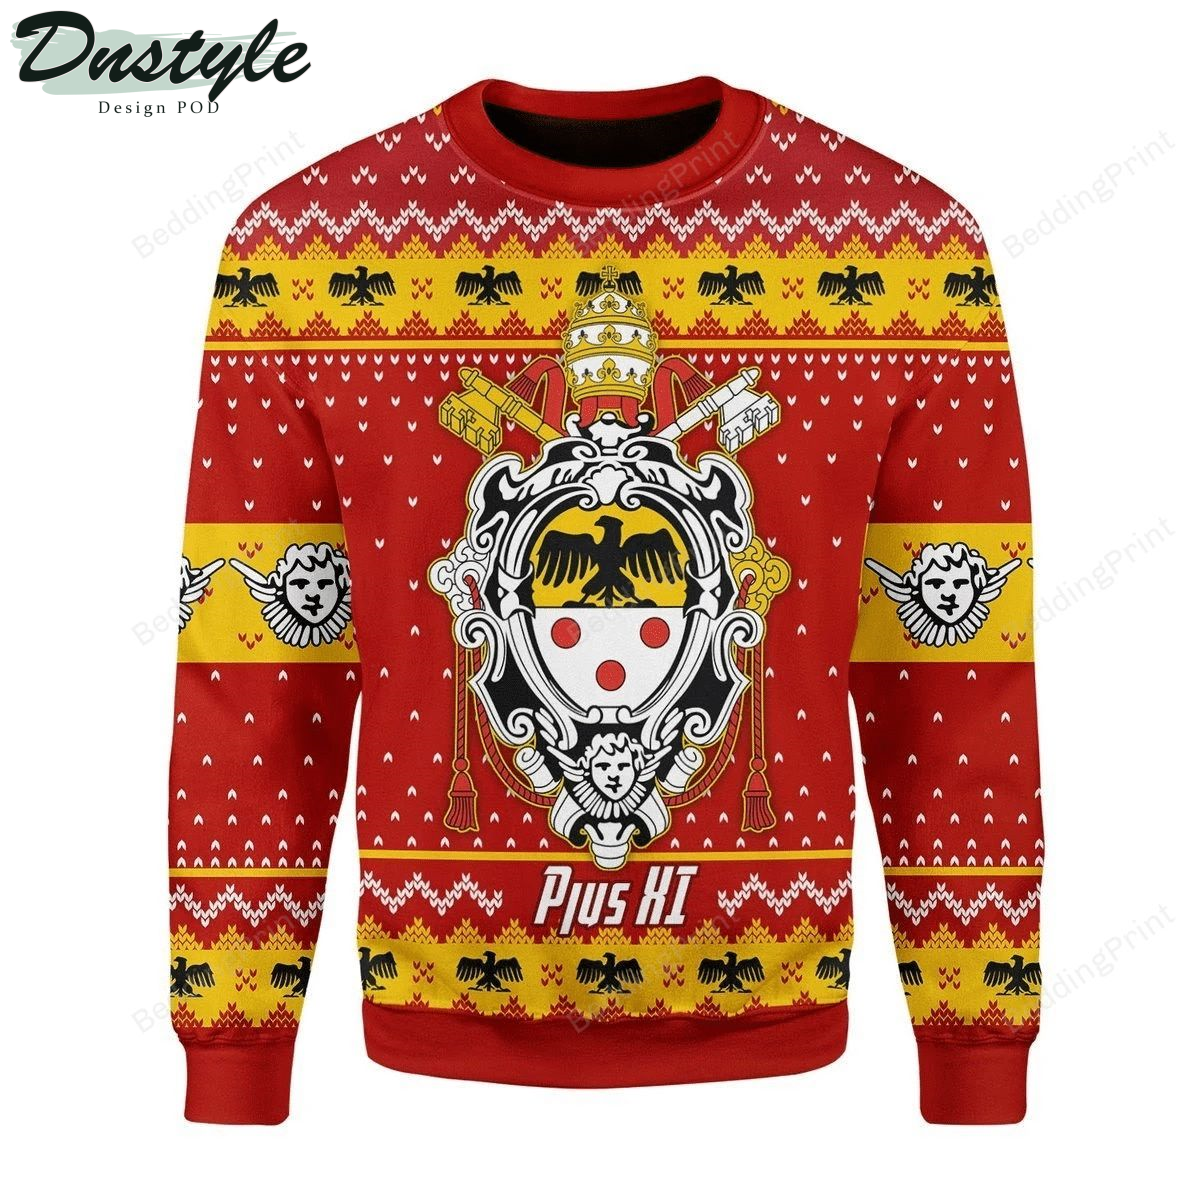 Order Of The Eastern Star Ugly Christmas Sweater